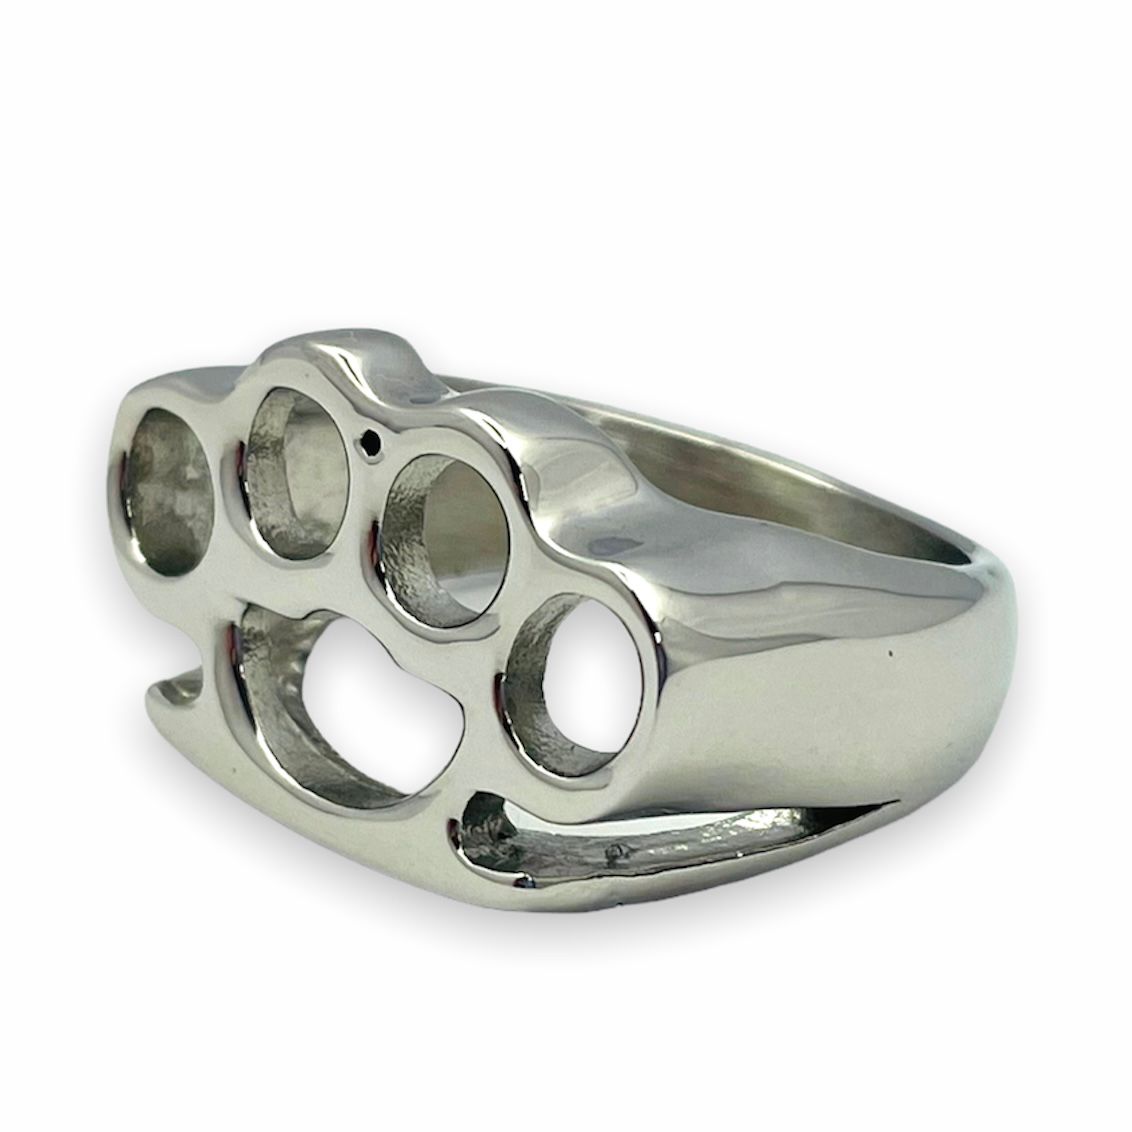 Punch Button Iron Boxing 2018 Four Finger Knuckle Duster Ring / Paper  Weight CNC Machined Finger Diameter Protective Gear From Qq987345222,  $12.07 | DHgate.Com